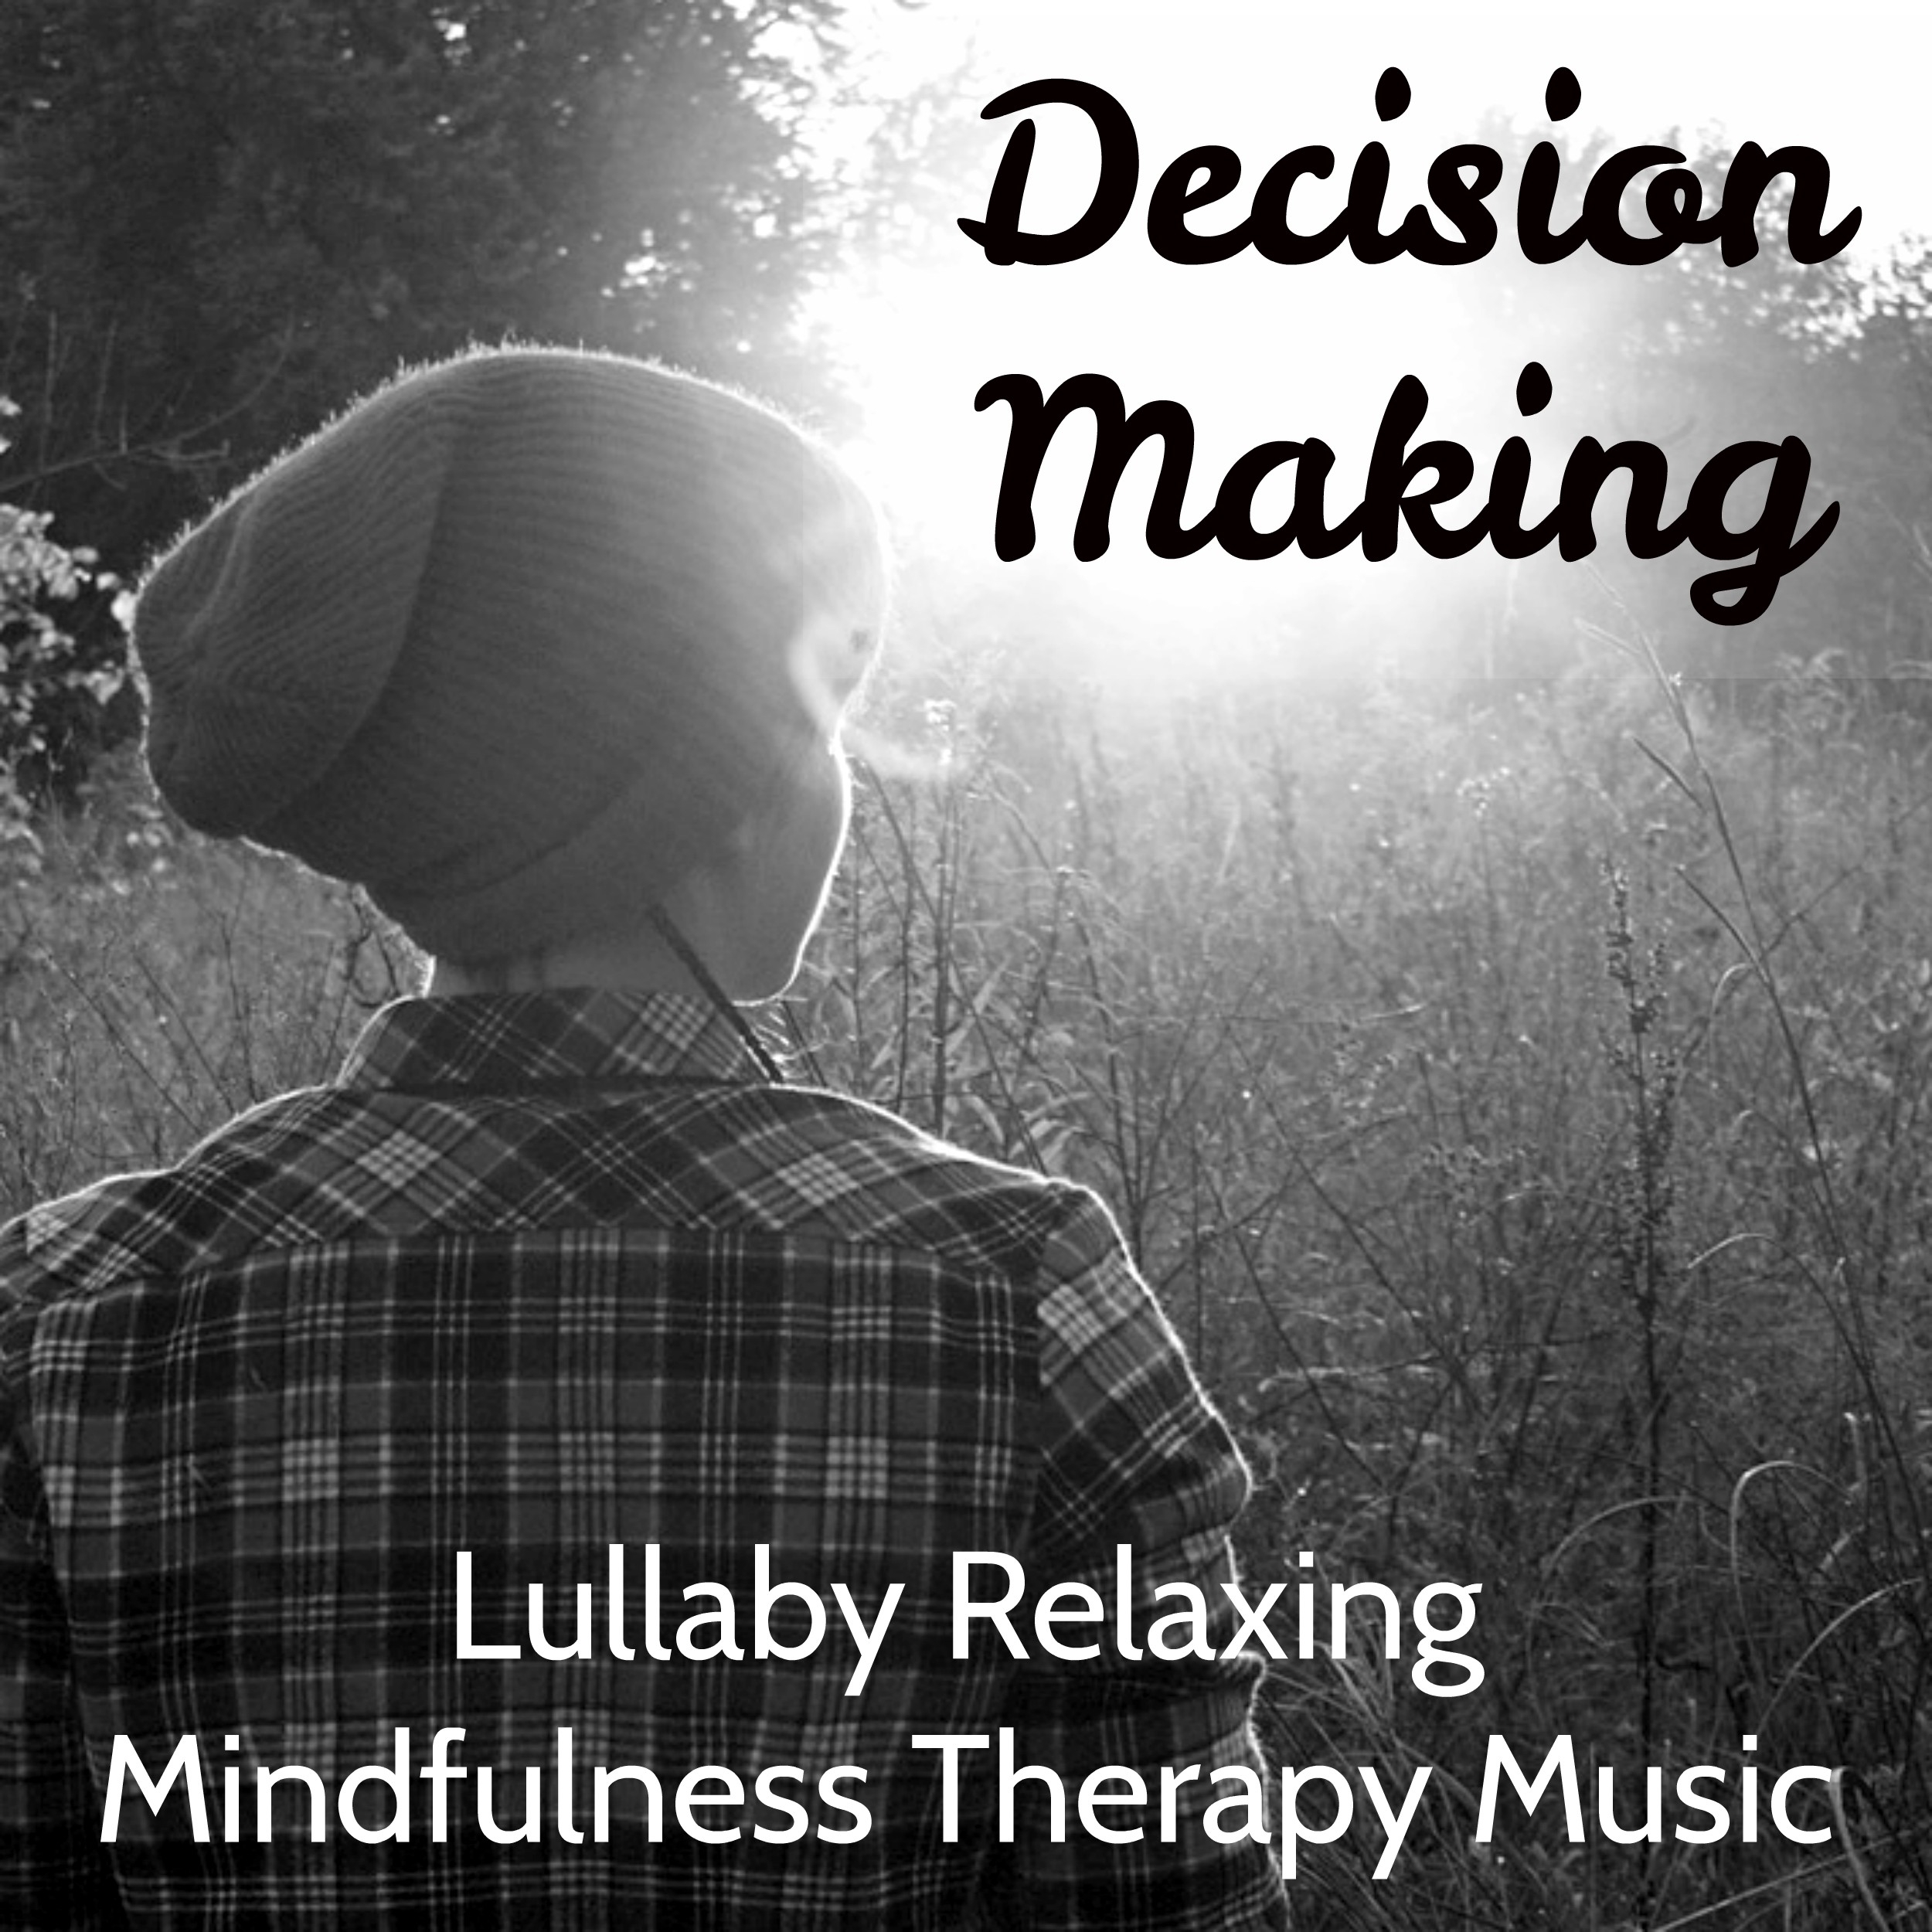 Decision Making - Lullaby Relaxing Mindfulness Therapy Music for Deep Concentration Meditation Classes Chakra Balancing with Instrumental Nature Sounds